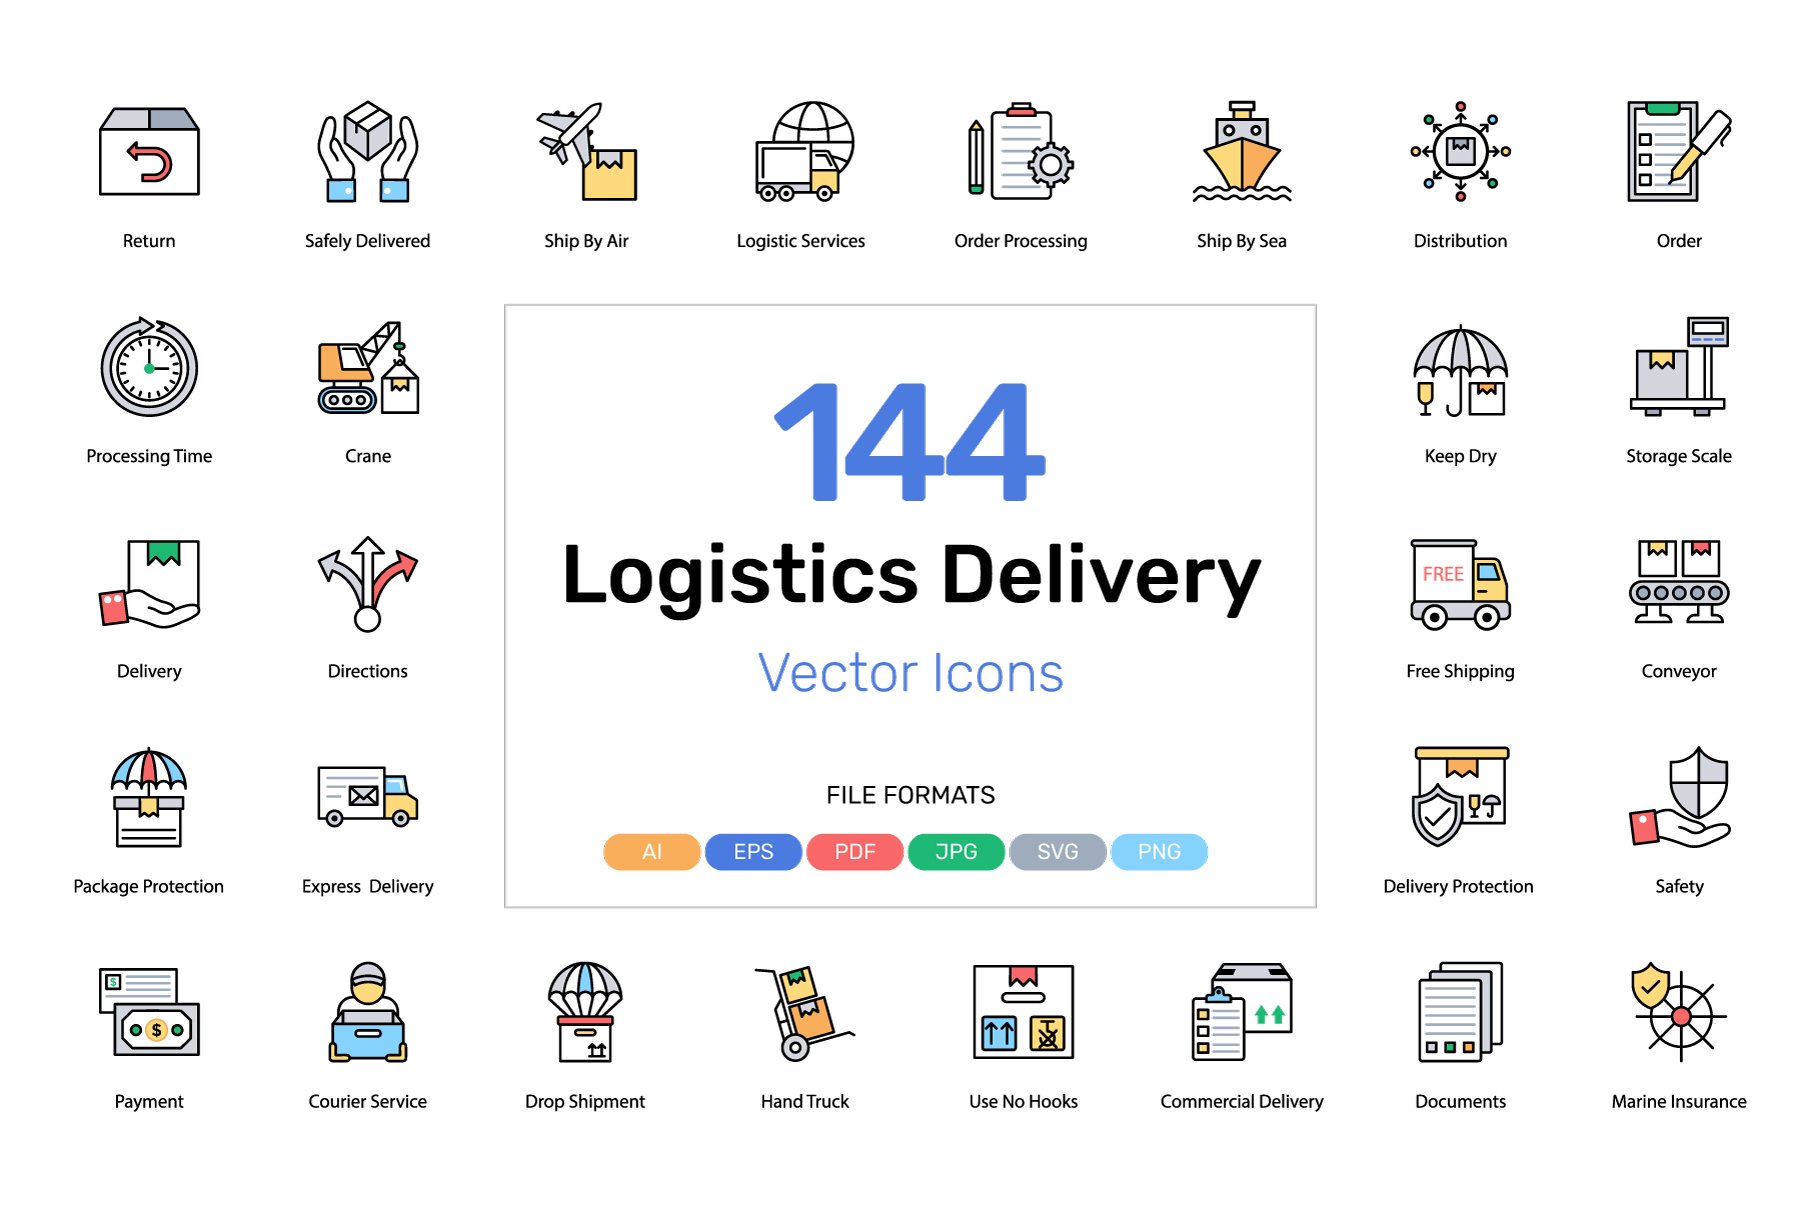 144 Logistics Delivery Vector Icons cover image.